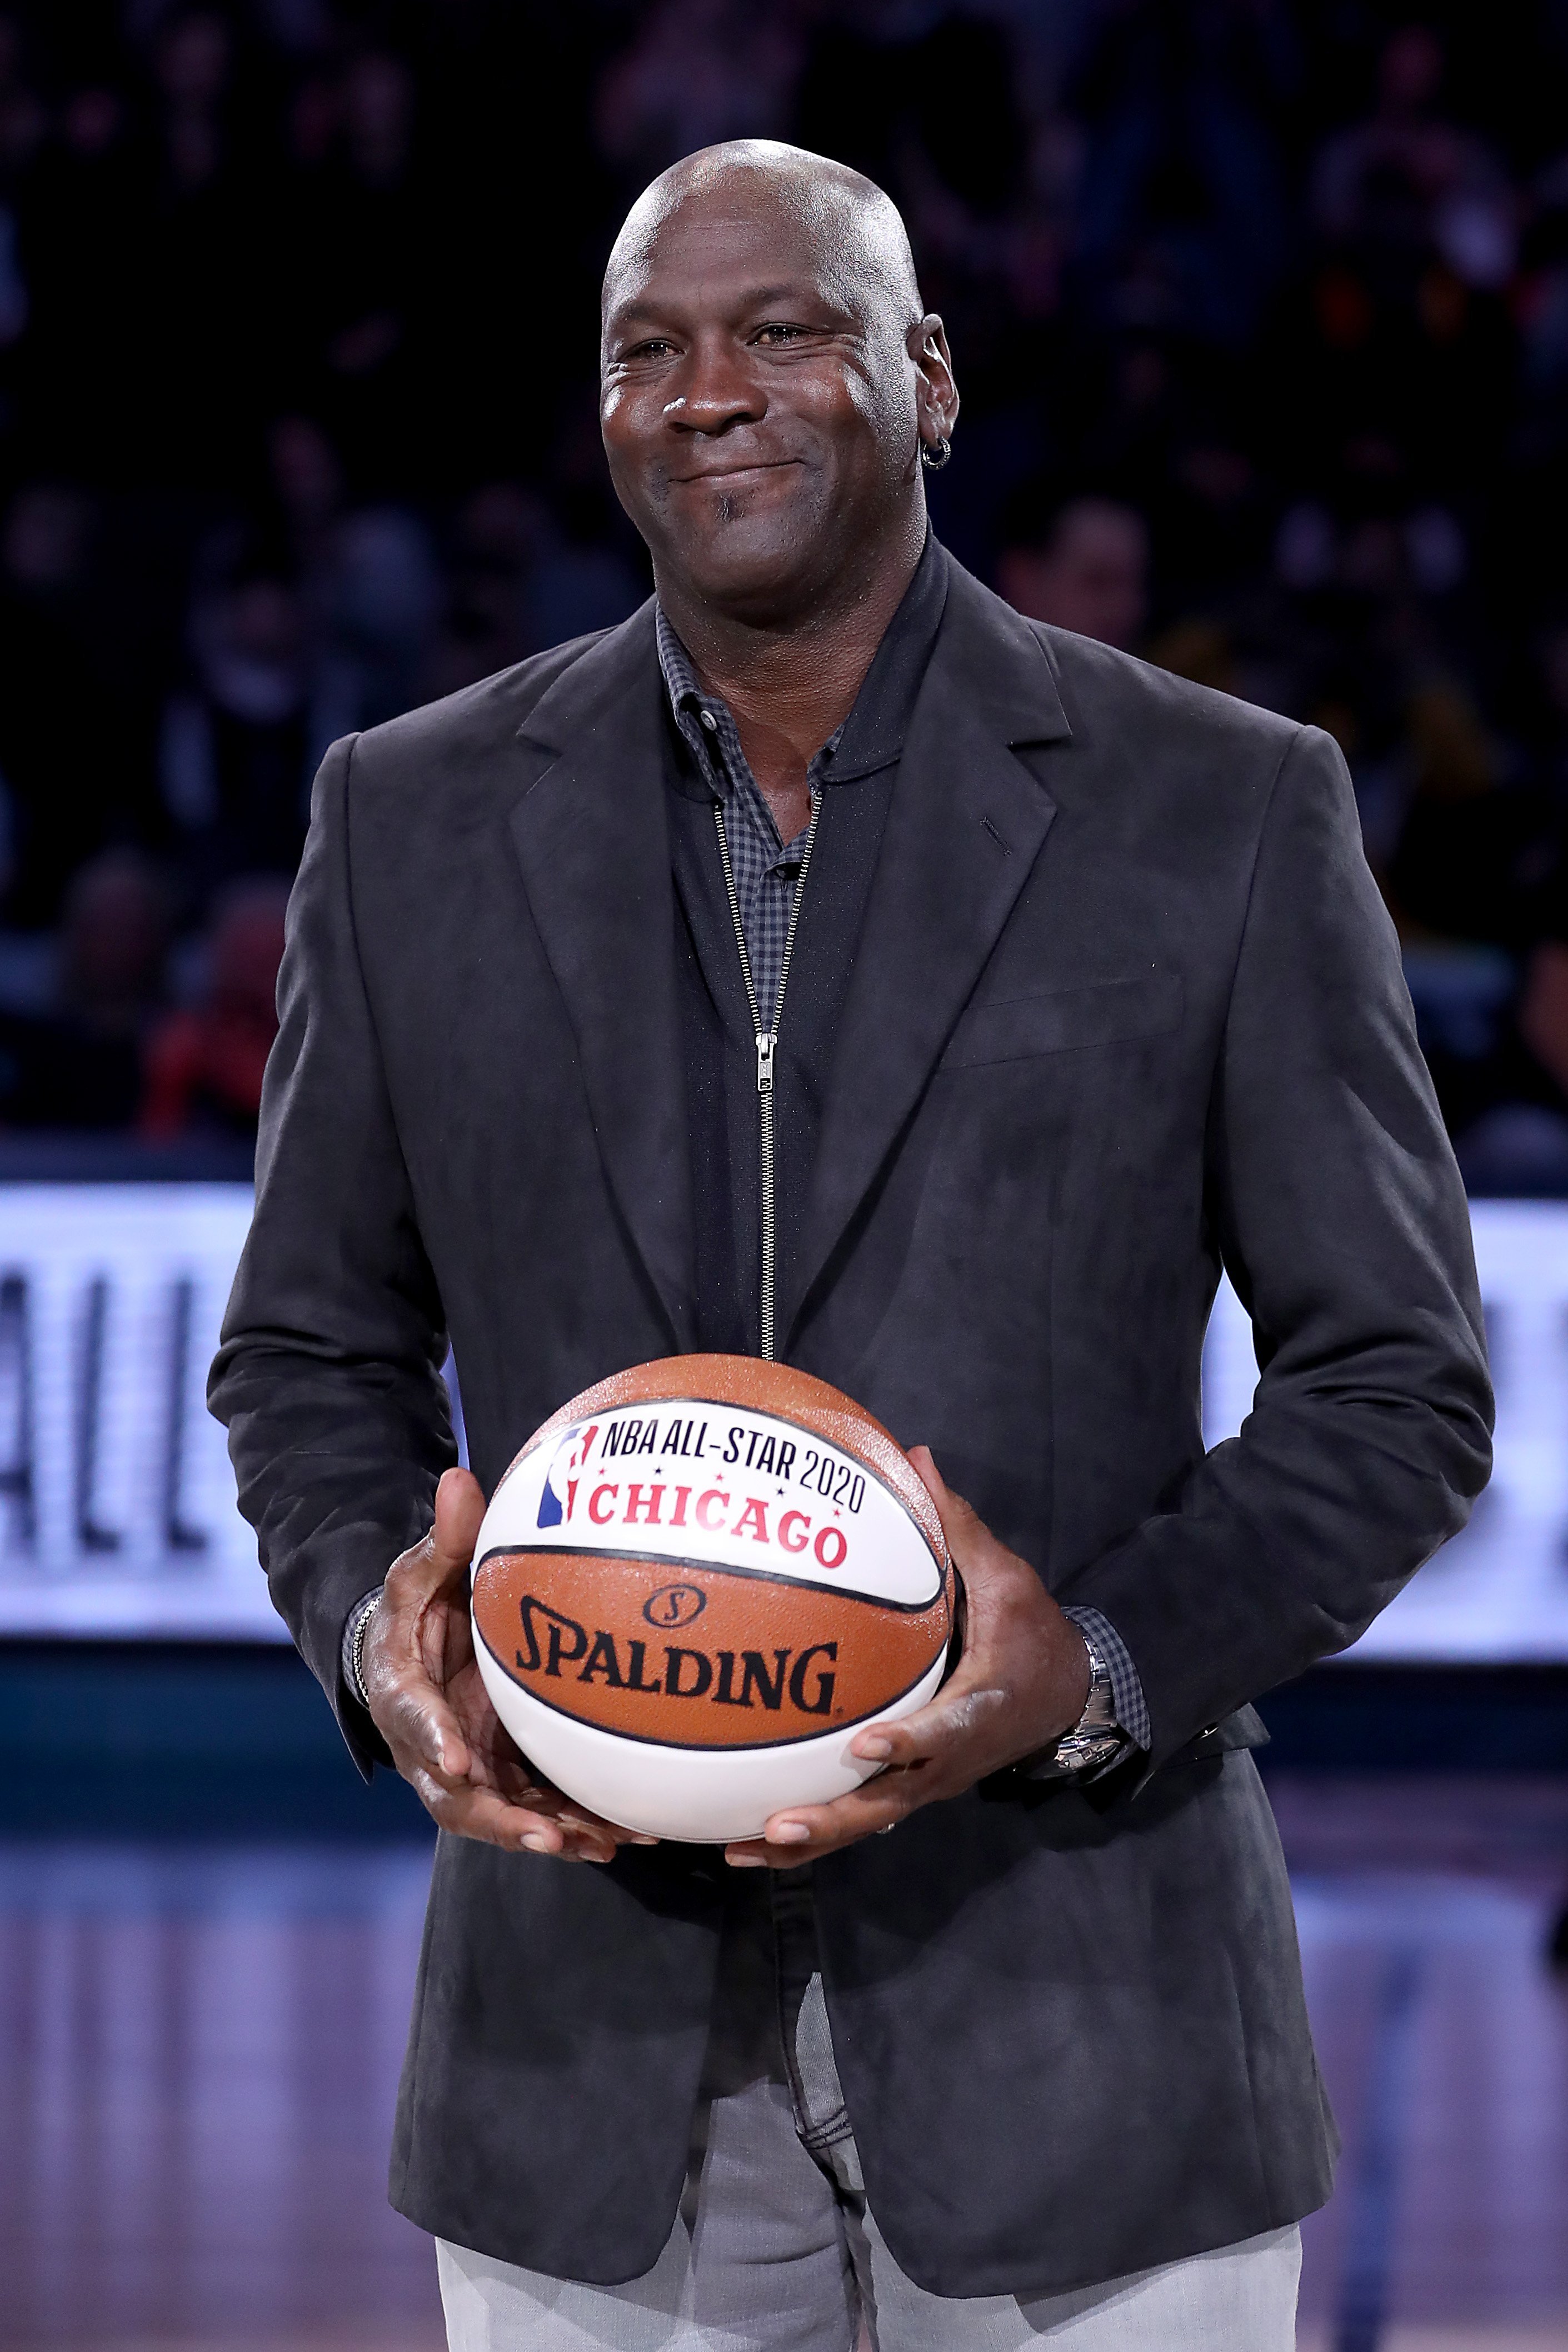 Michael Jordan takes part in a ceremony honoring the 2020 NBA All-Star game on February 17, 2019 | Photo: Getty Images